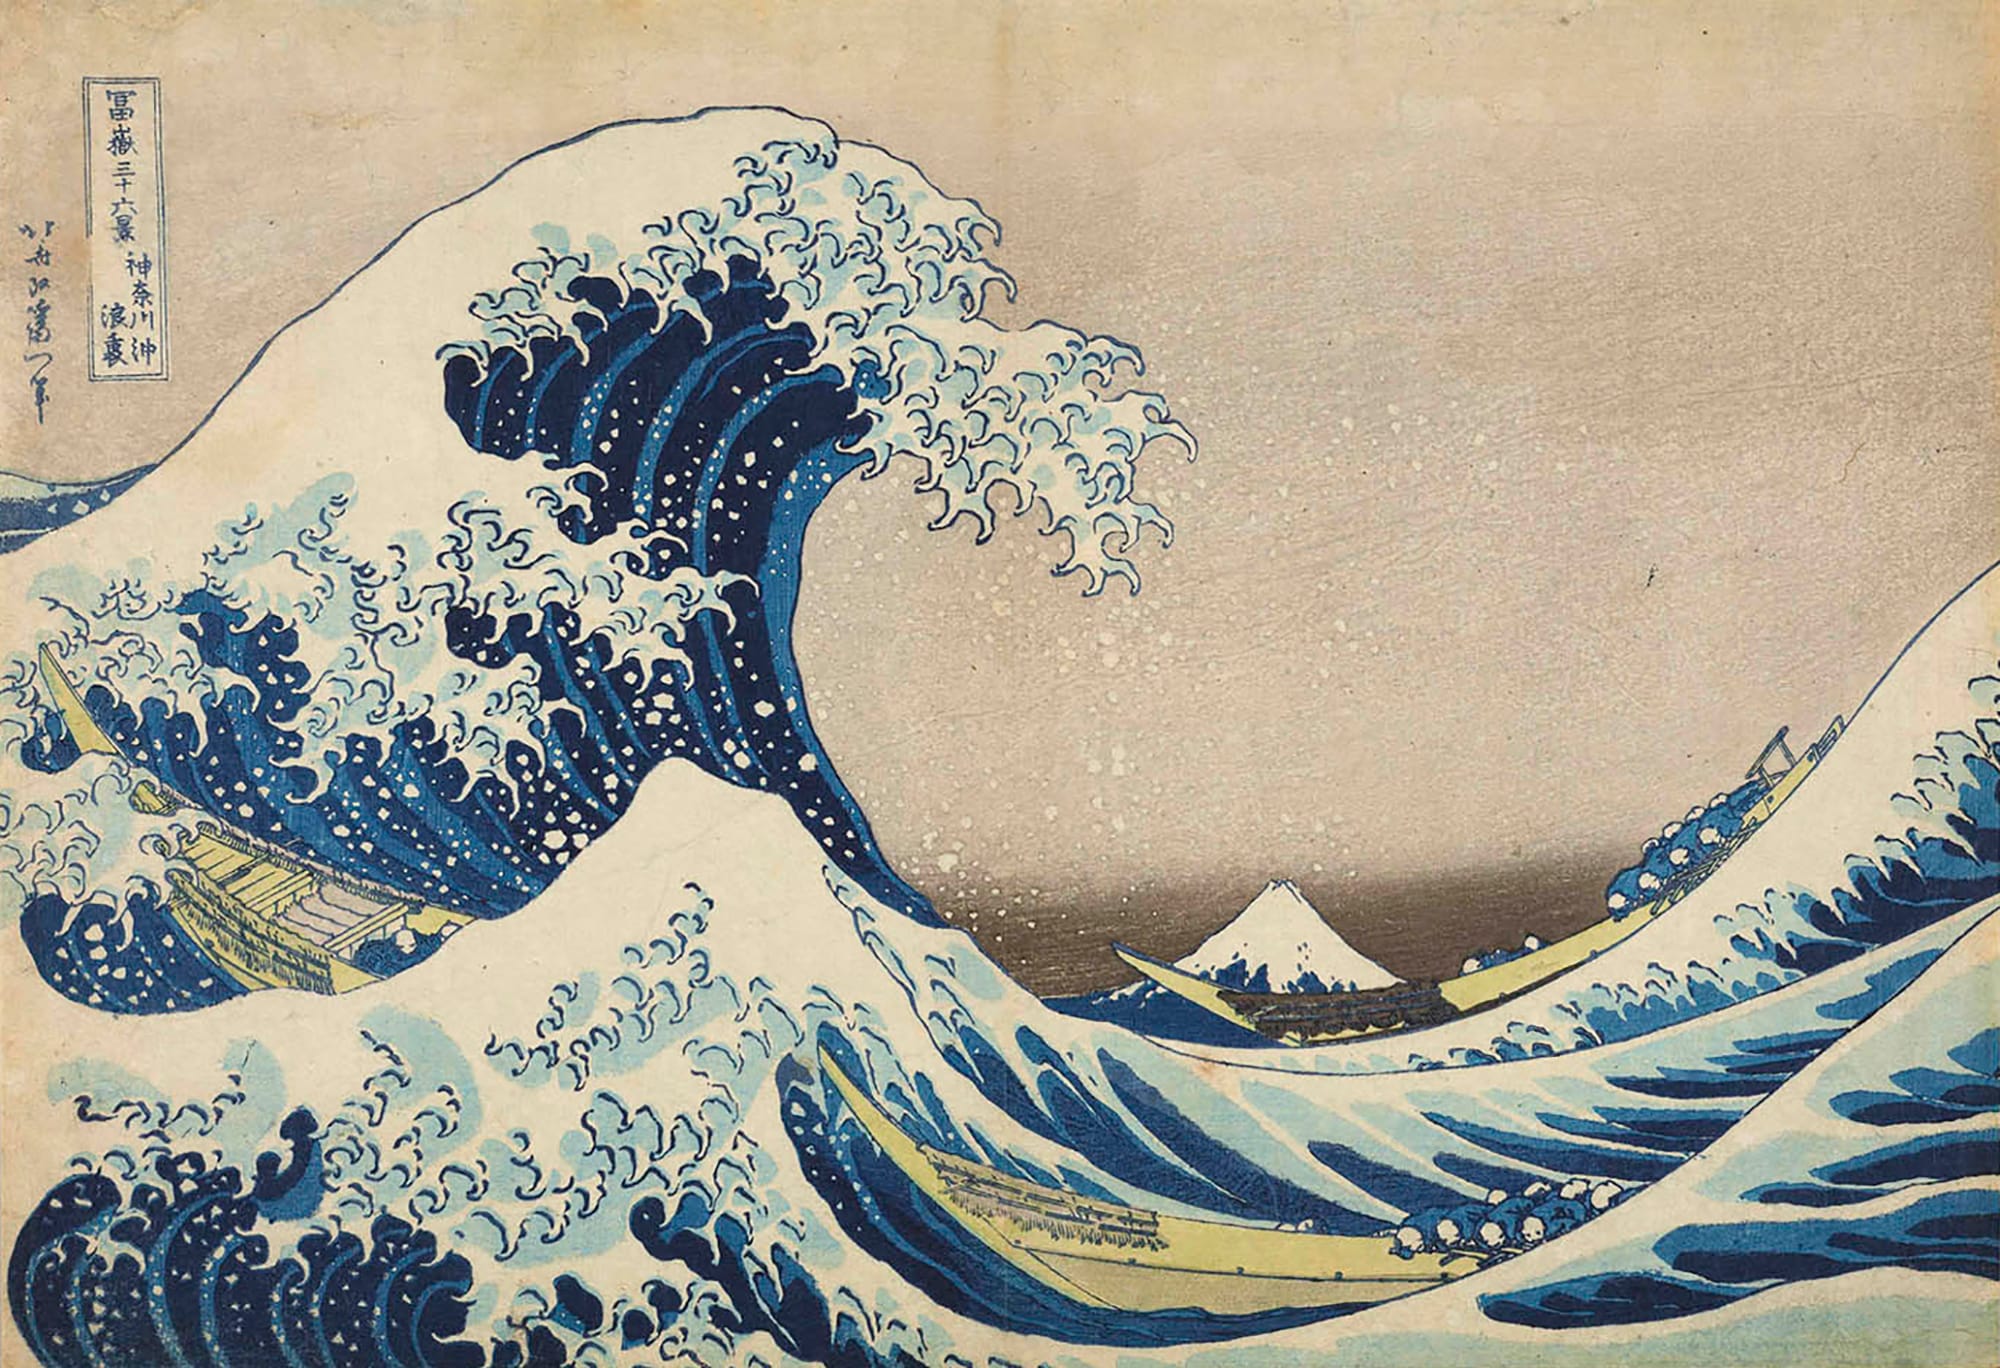 Katsushika Hokusai, The Great Wave off Kanagawa from the Series Thirty-six Views of Mount Fuji, Yoko-oban, Nishiki-e, Around the 1st to 4th year of the Tenpō Era (1830-1833), Ota Memorial Museum of Art. The world’s most famous Japanese art, known as “The Great Wave” will be featured at the exhibition. While the three museums will be changing the artworks during exhibition, this masterpiece will be displayed during the entire exhibition.